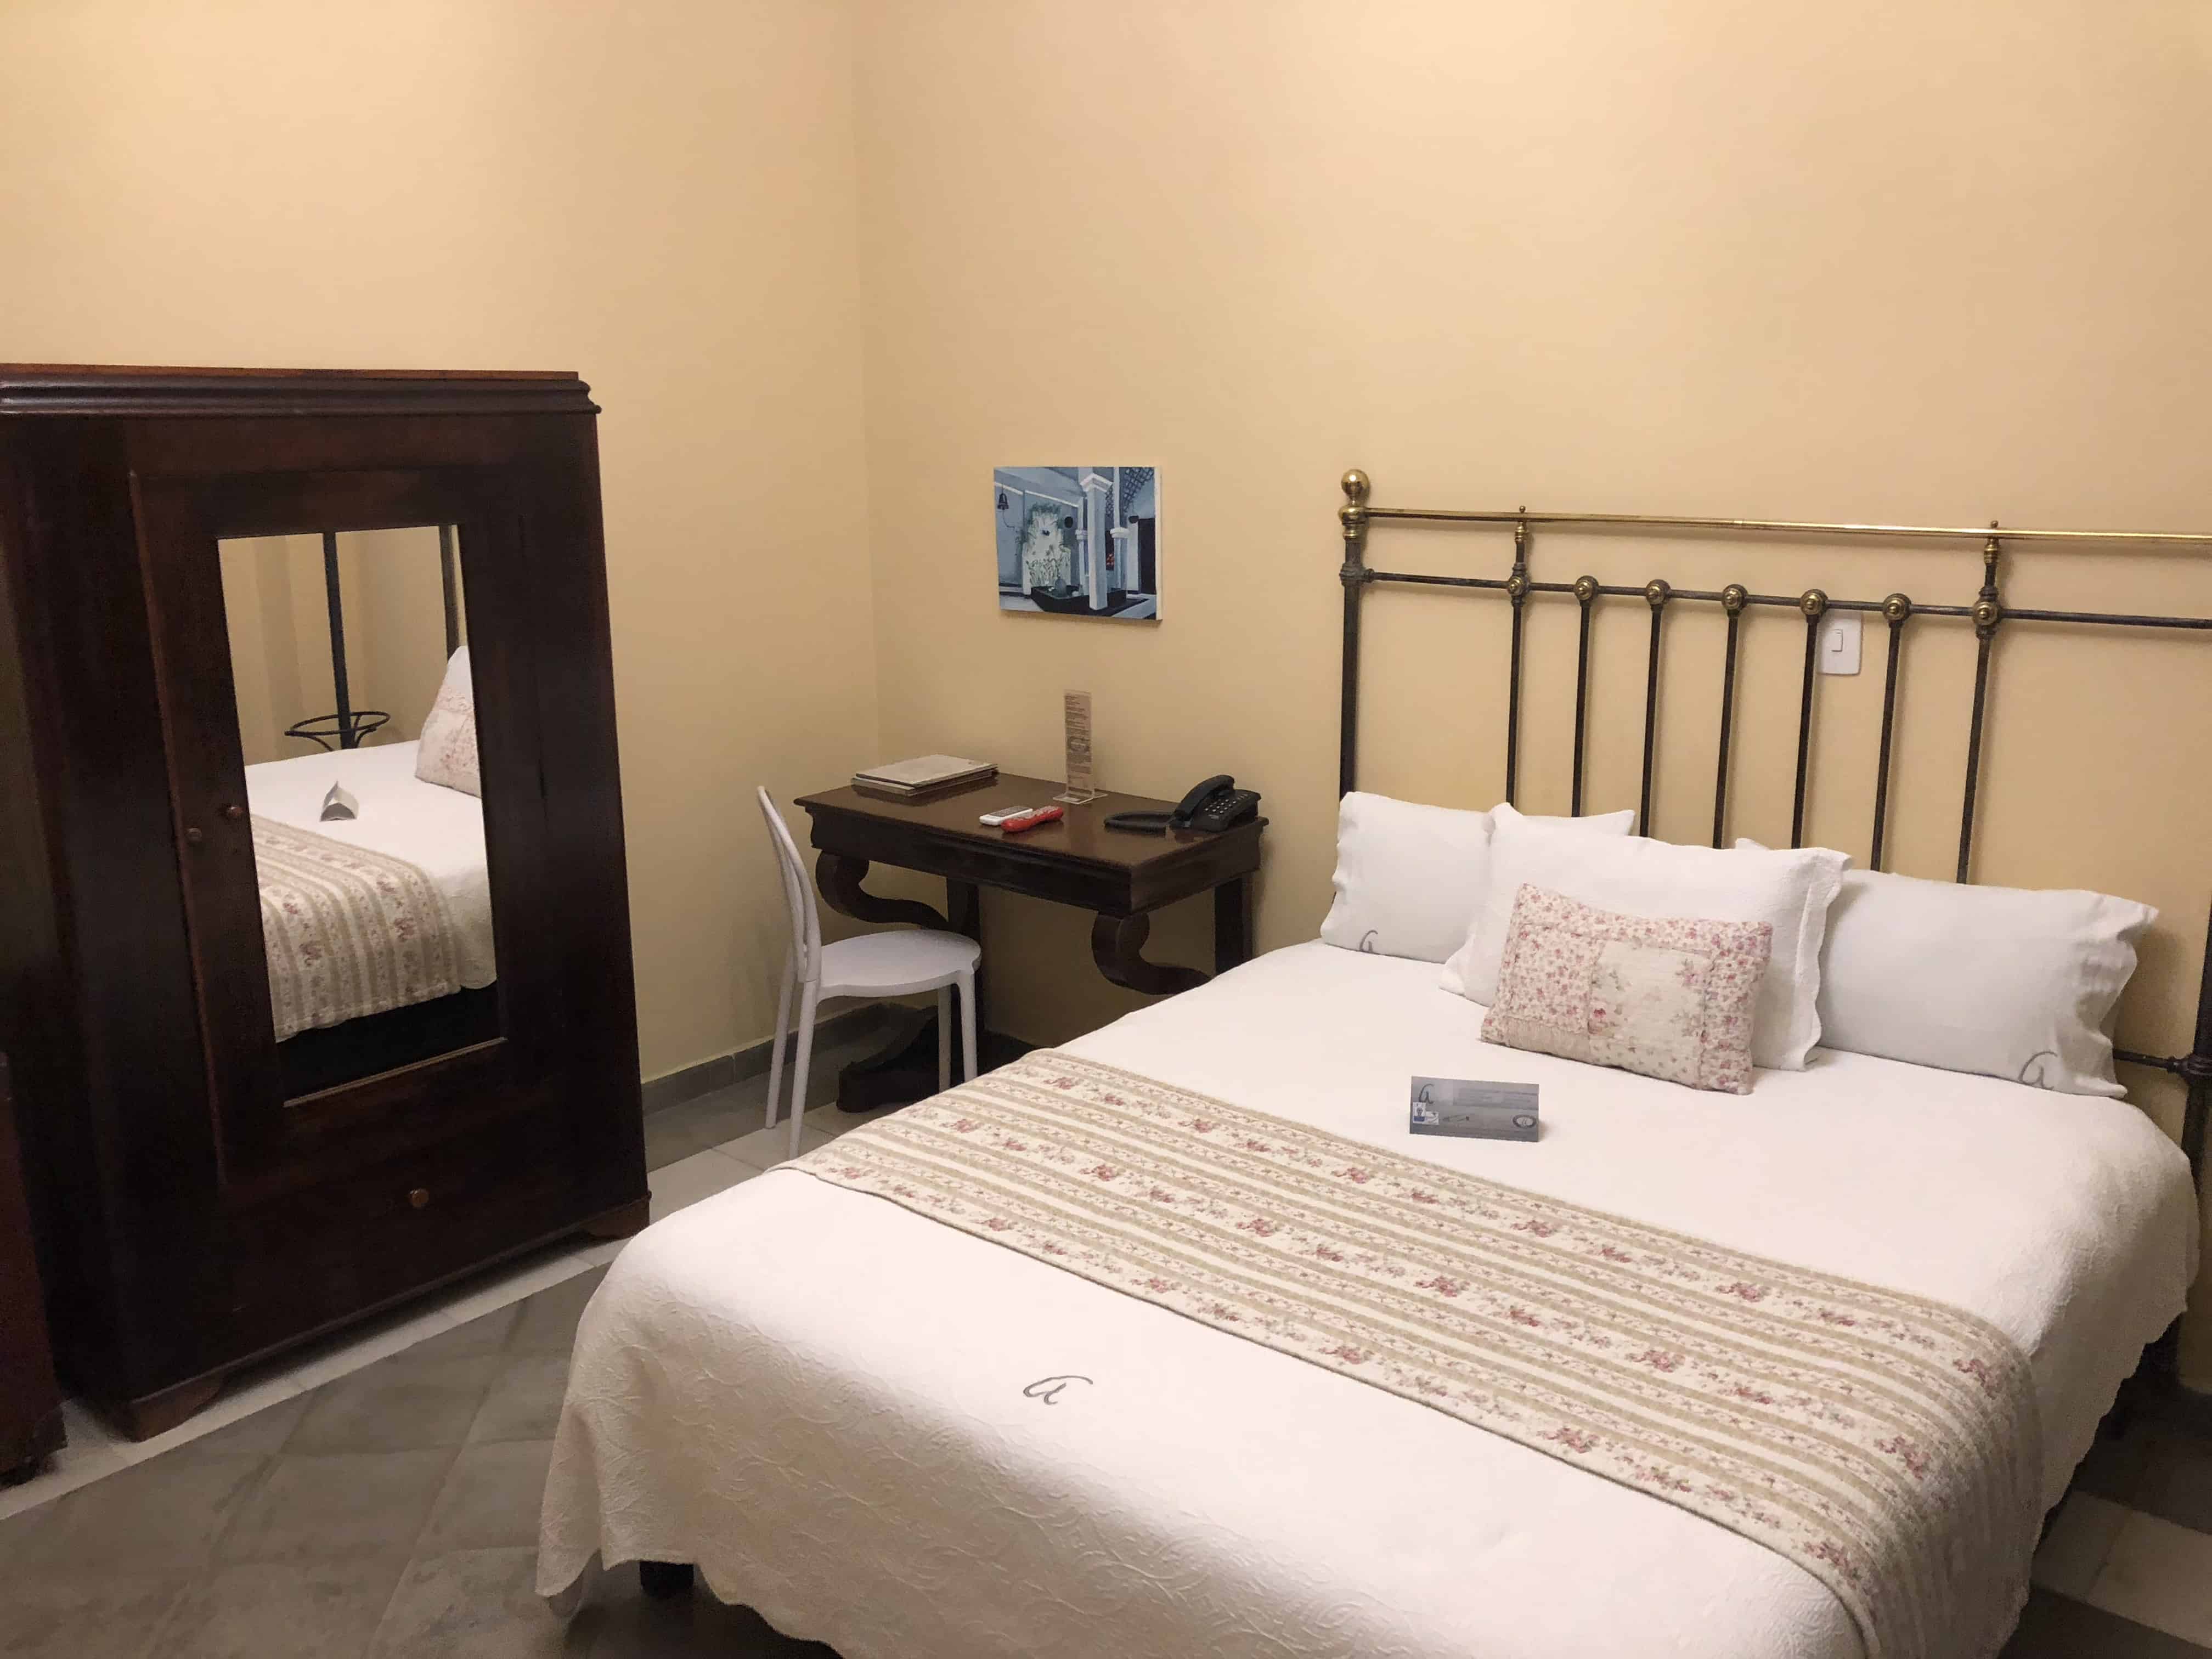 Standard room at Hotel Boutique Don Alfonso in Pereira, Risaralda, Colombia